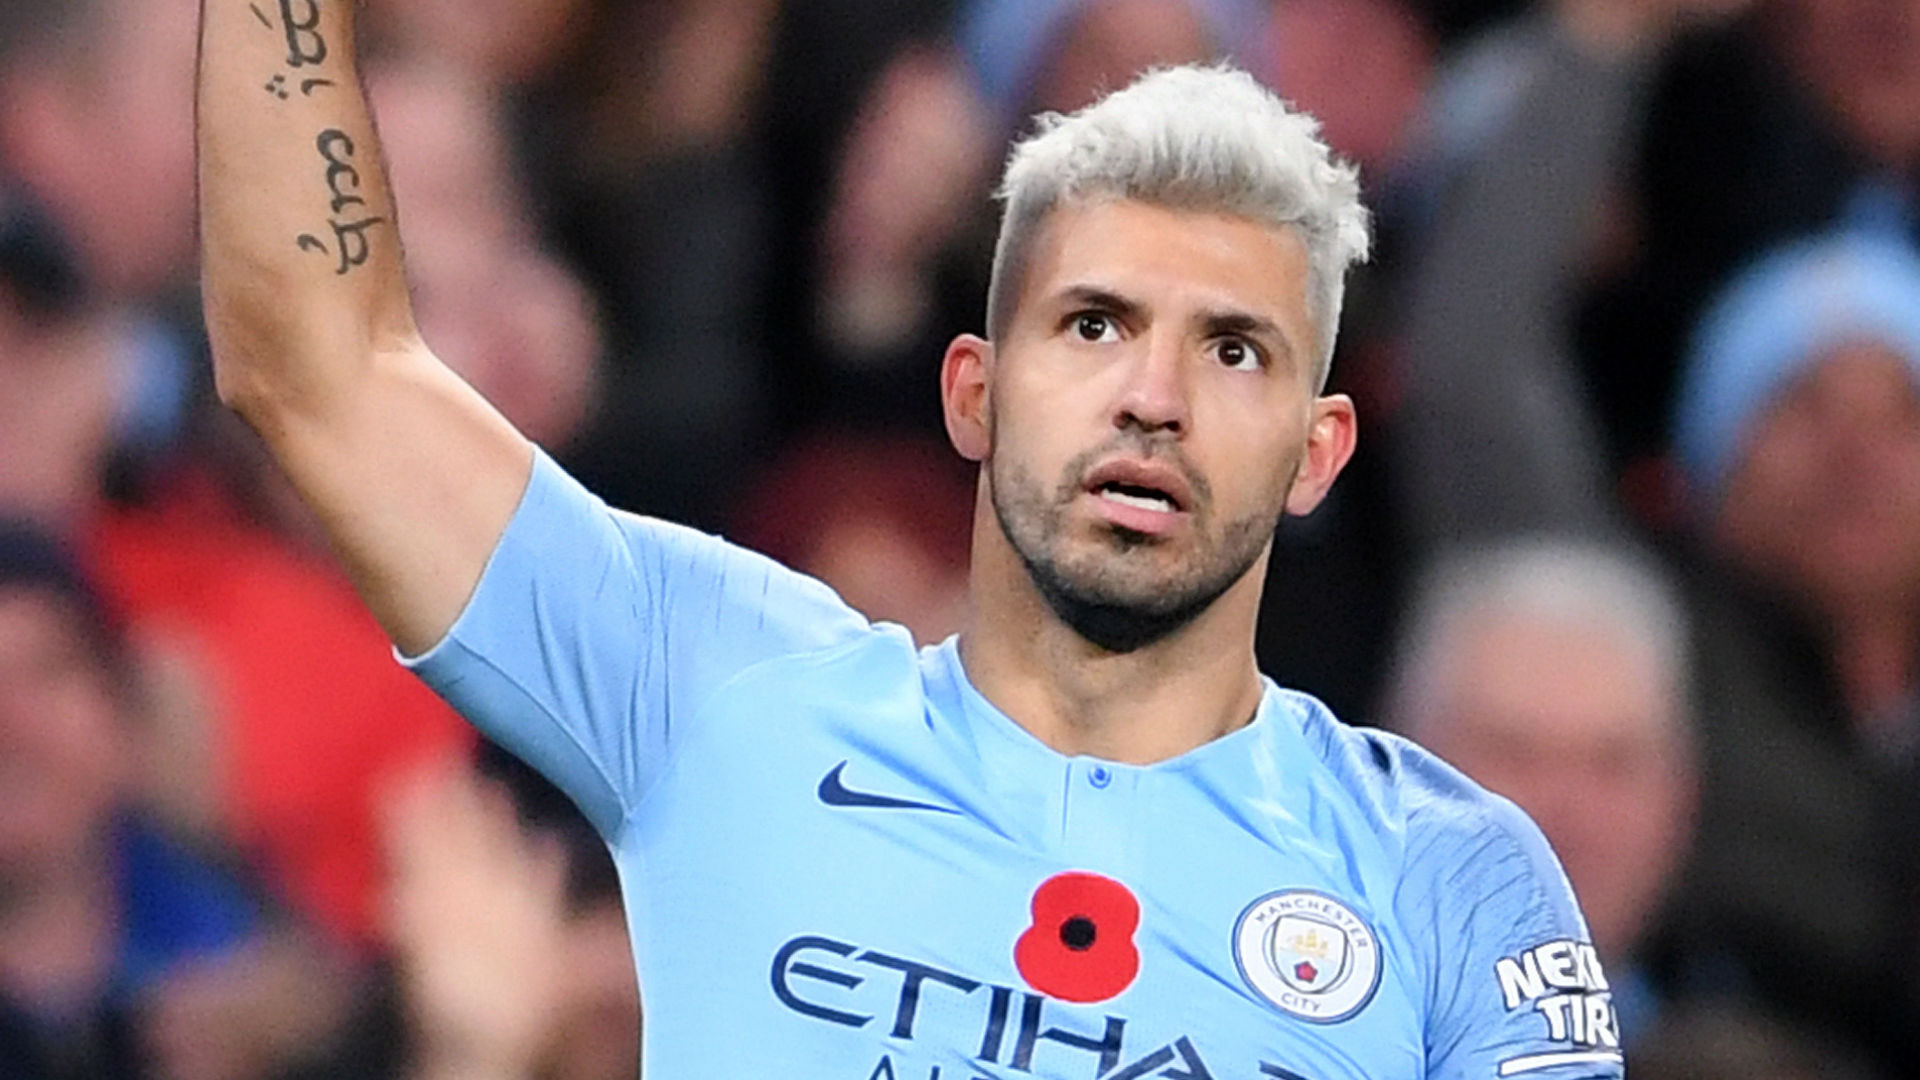 Sergio Aguero hair: Manchester City star Sergio Aguero reveals why he dyed  his hair prior to victory against United in the derby  Cameroon